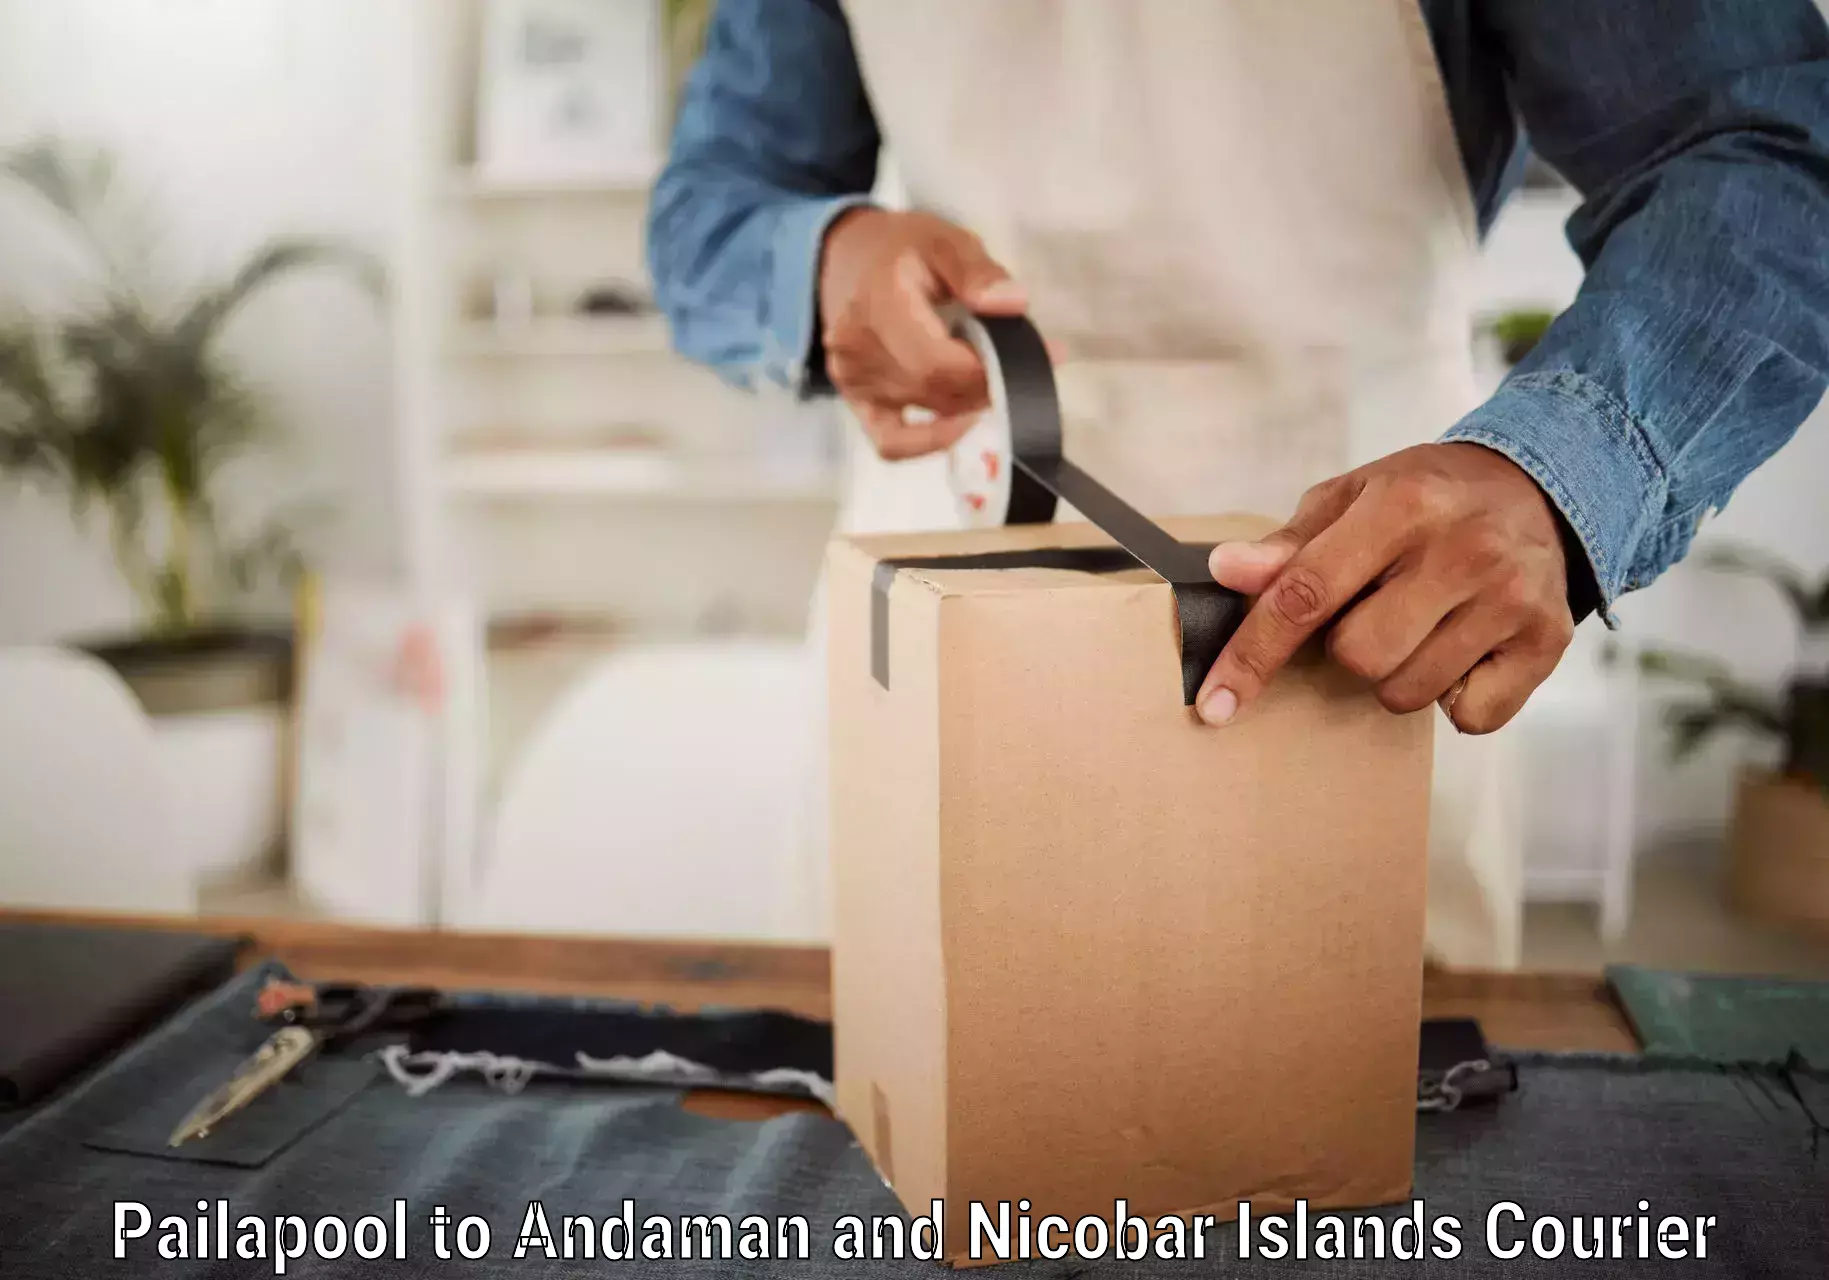 Efficient order fulfillment Pailapool to Andaman and Nicobar Islands